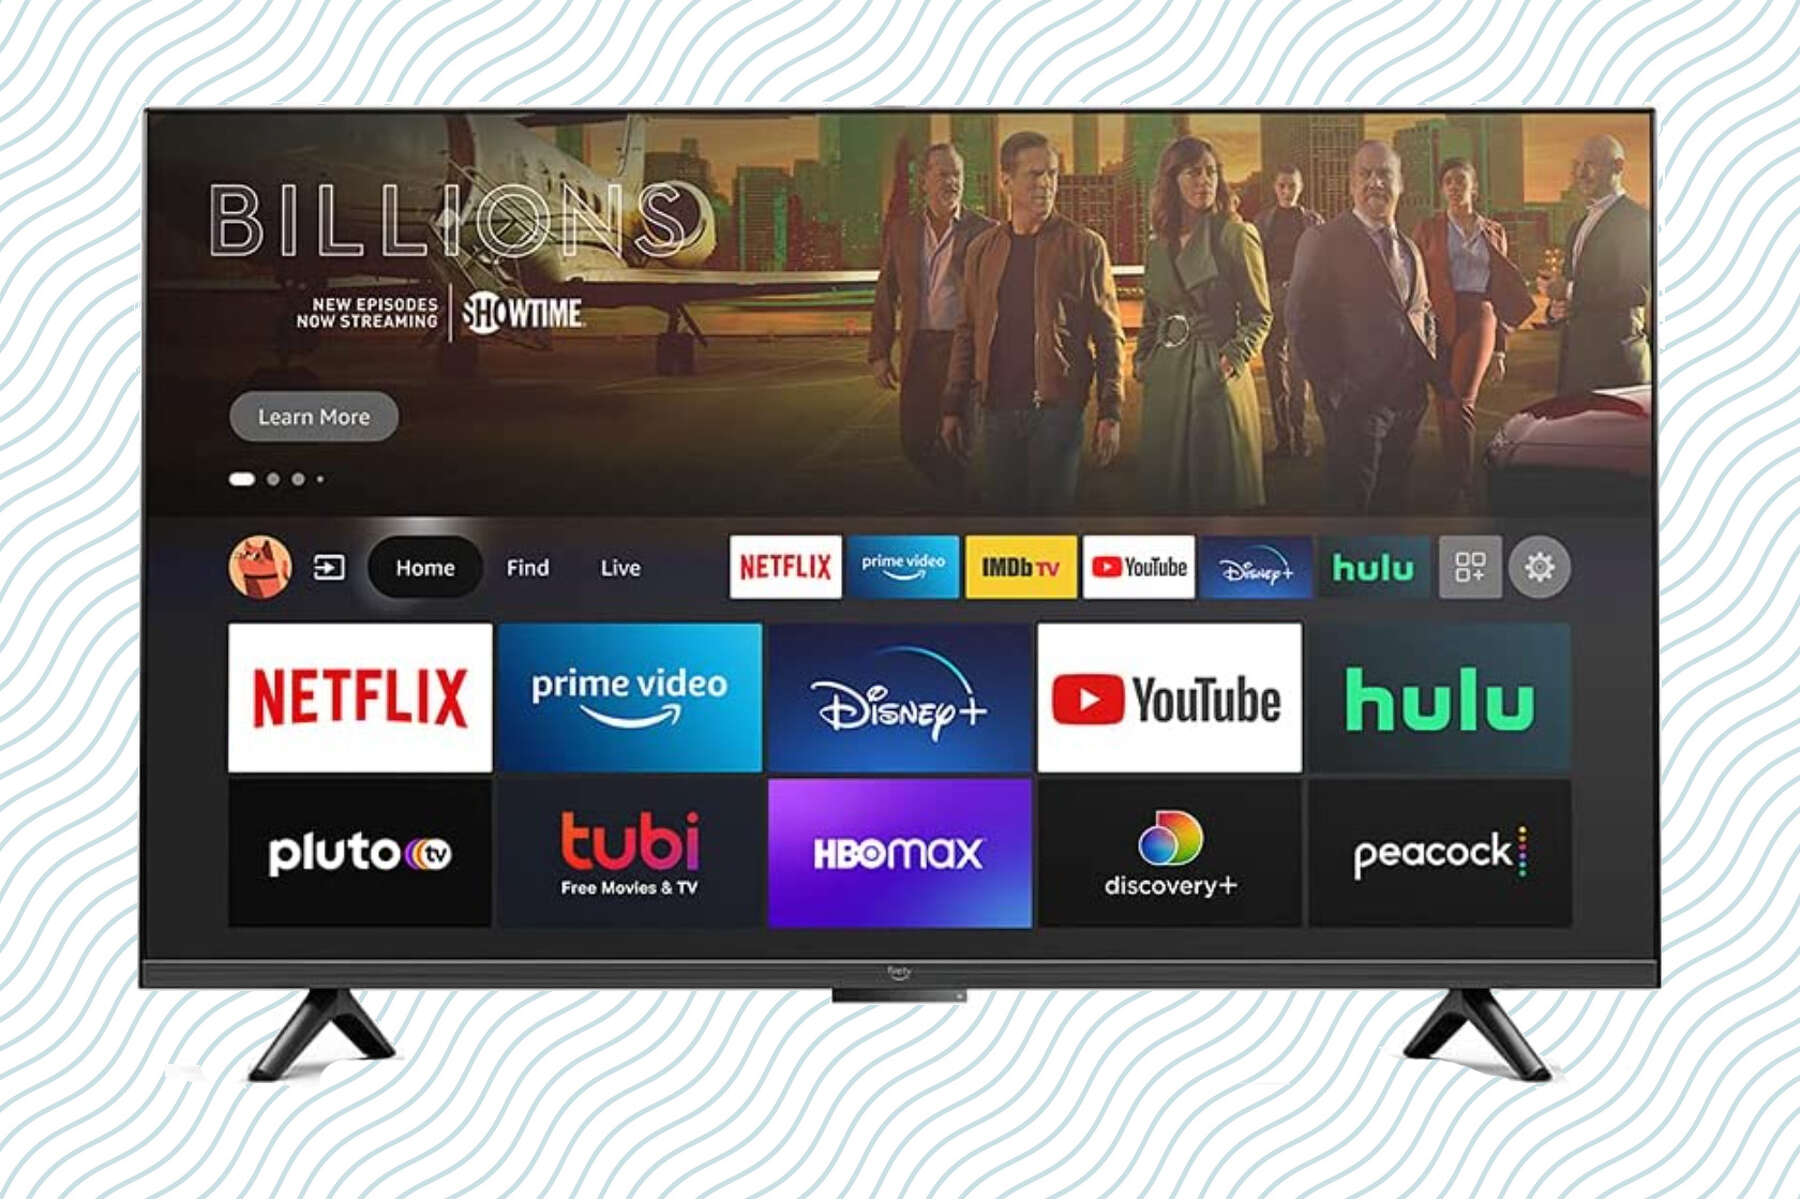 Both Fire TV Smart TV lightning deals sold out in under 1 minute